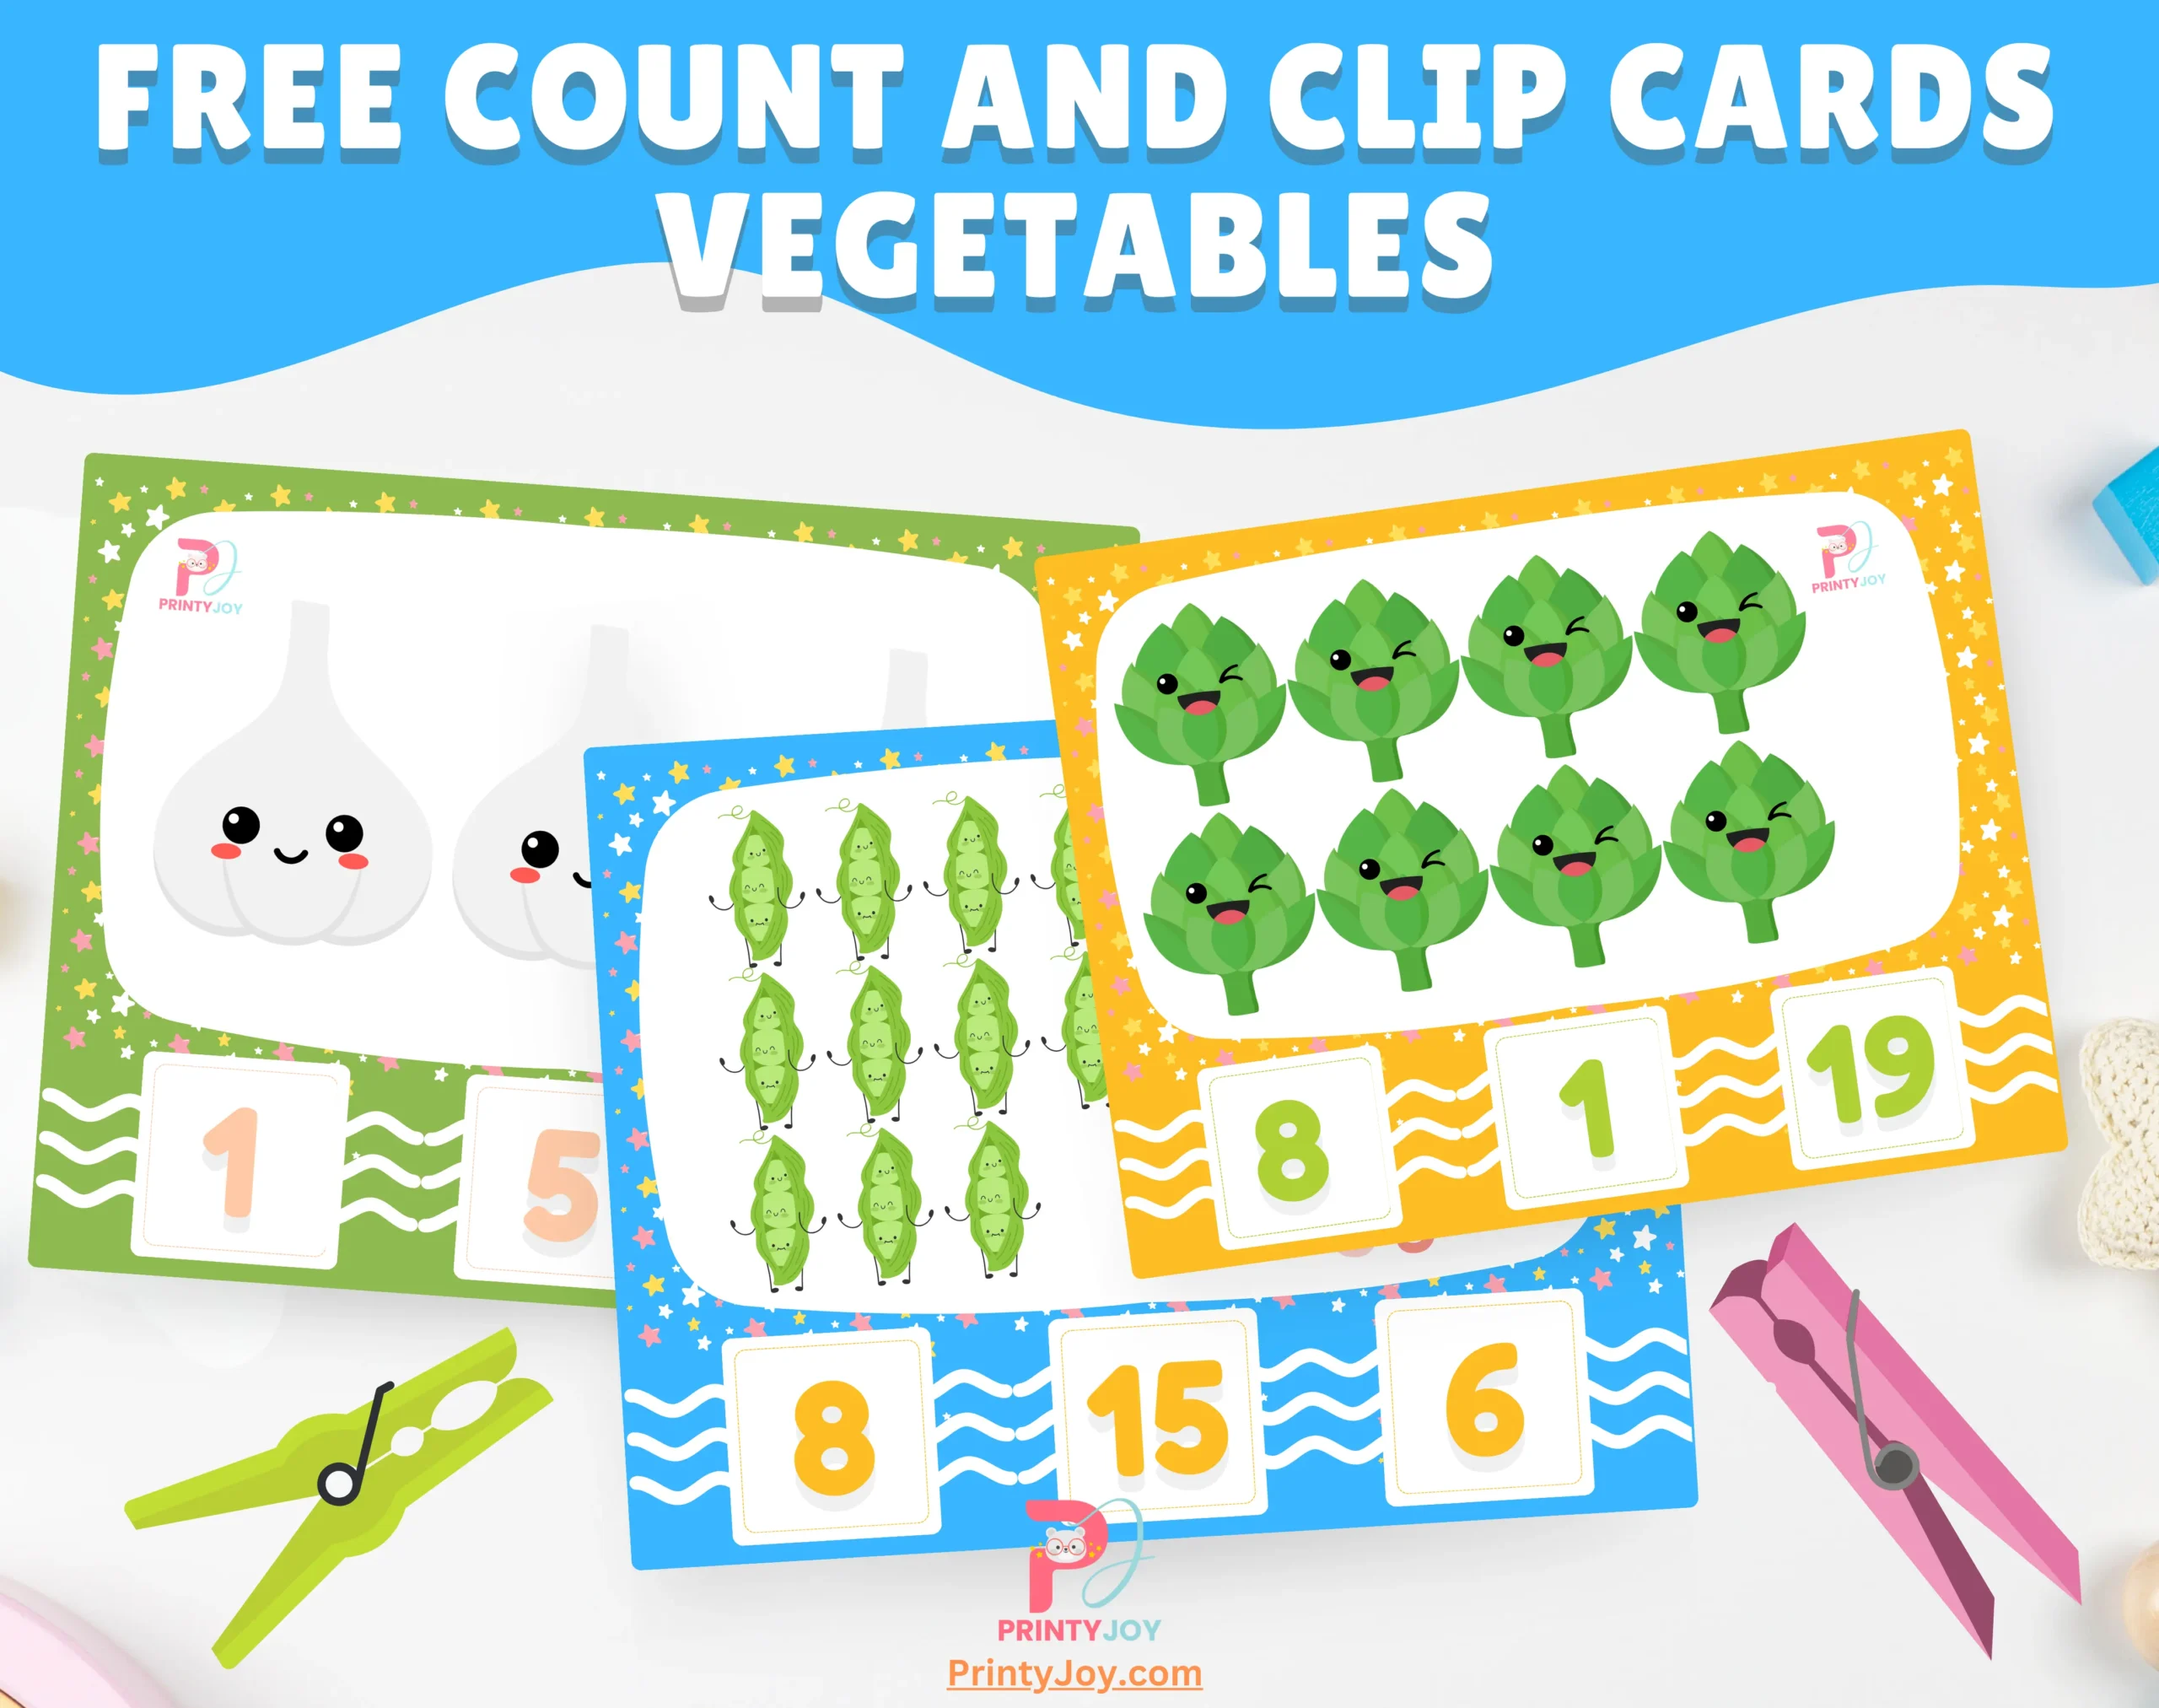 Free Count and Clip Cards Vegetables